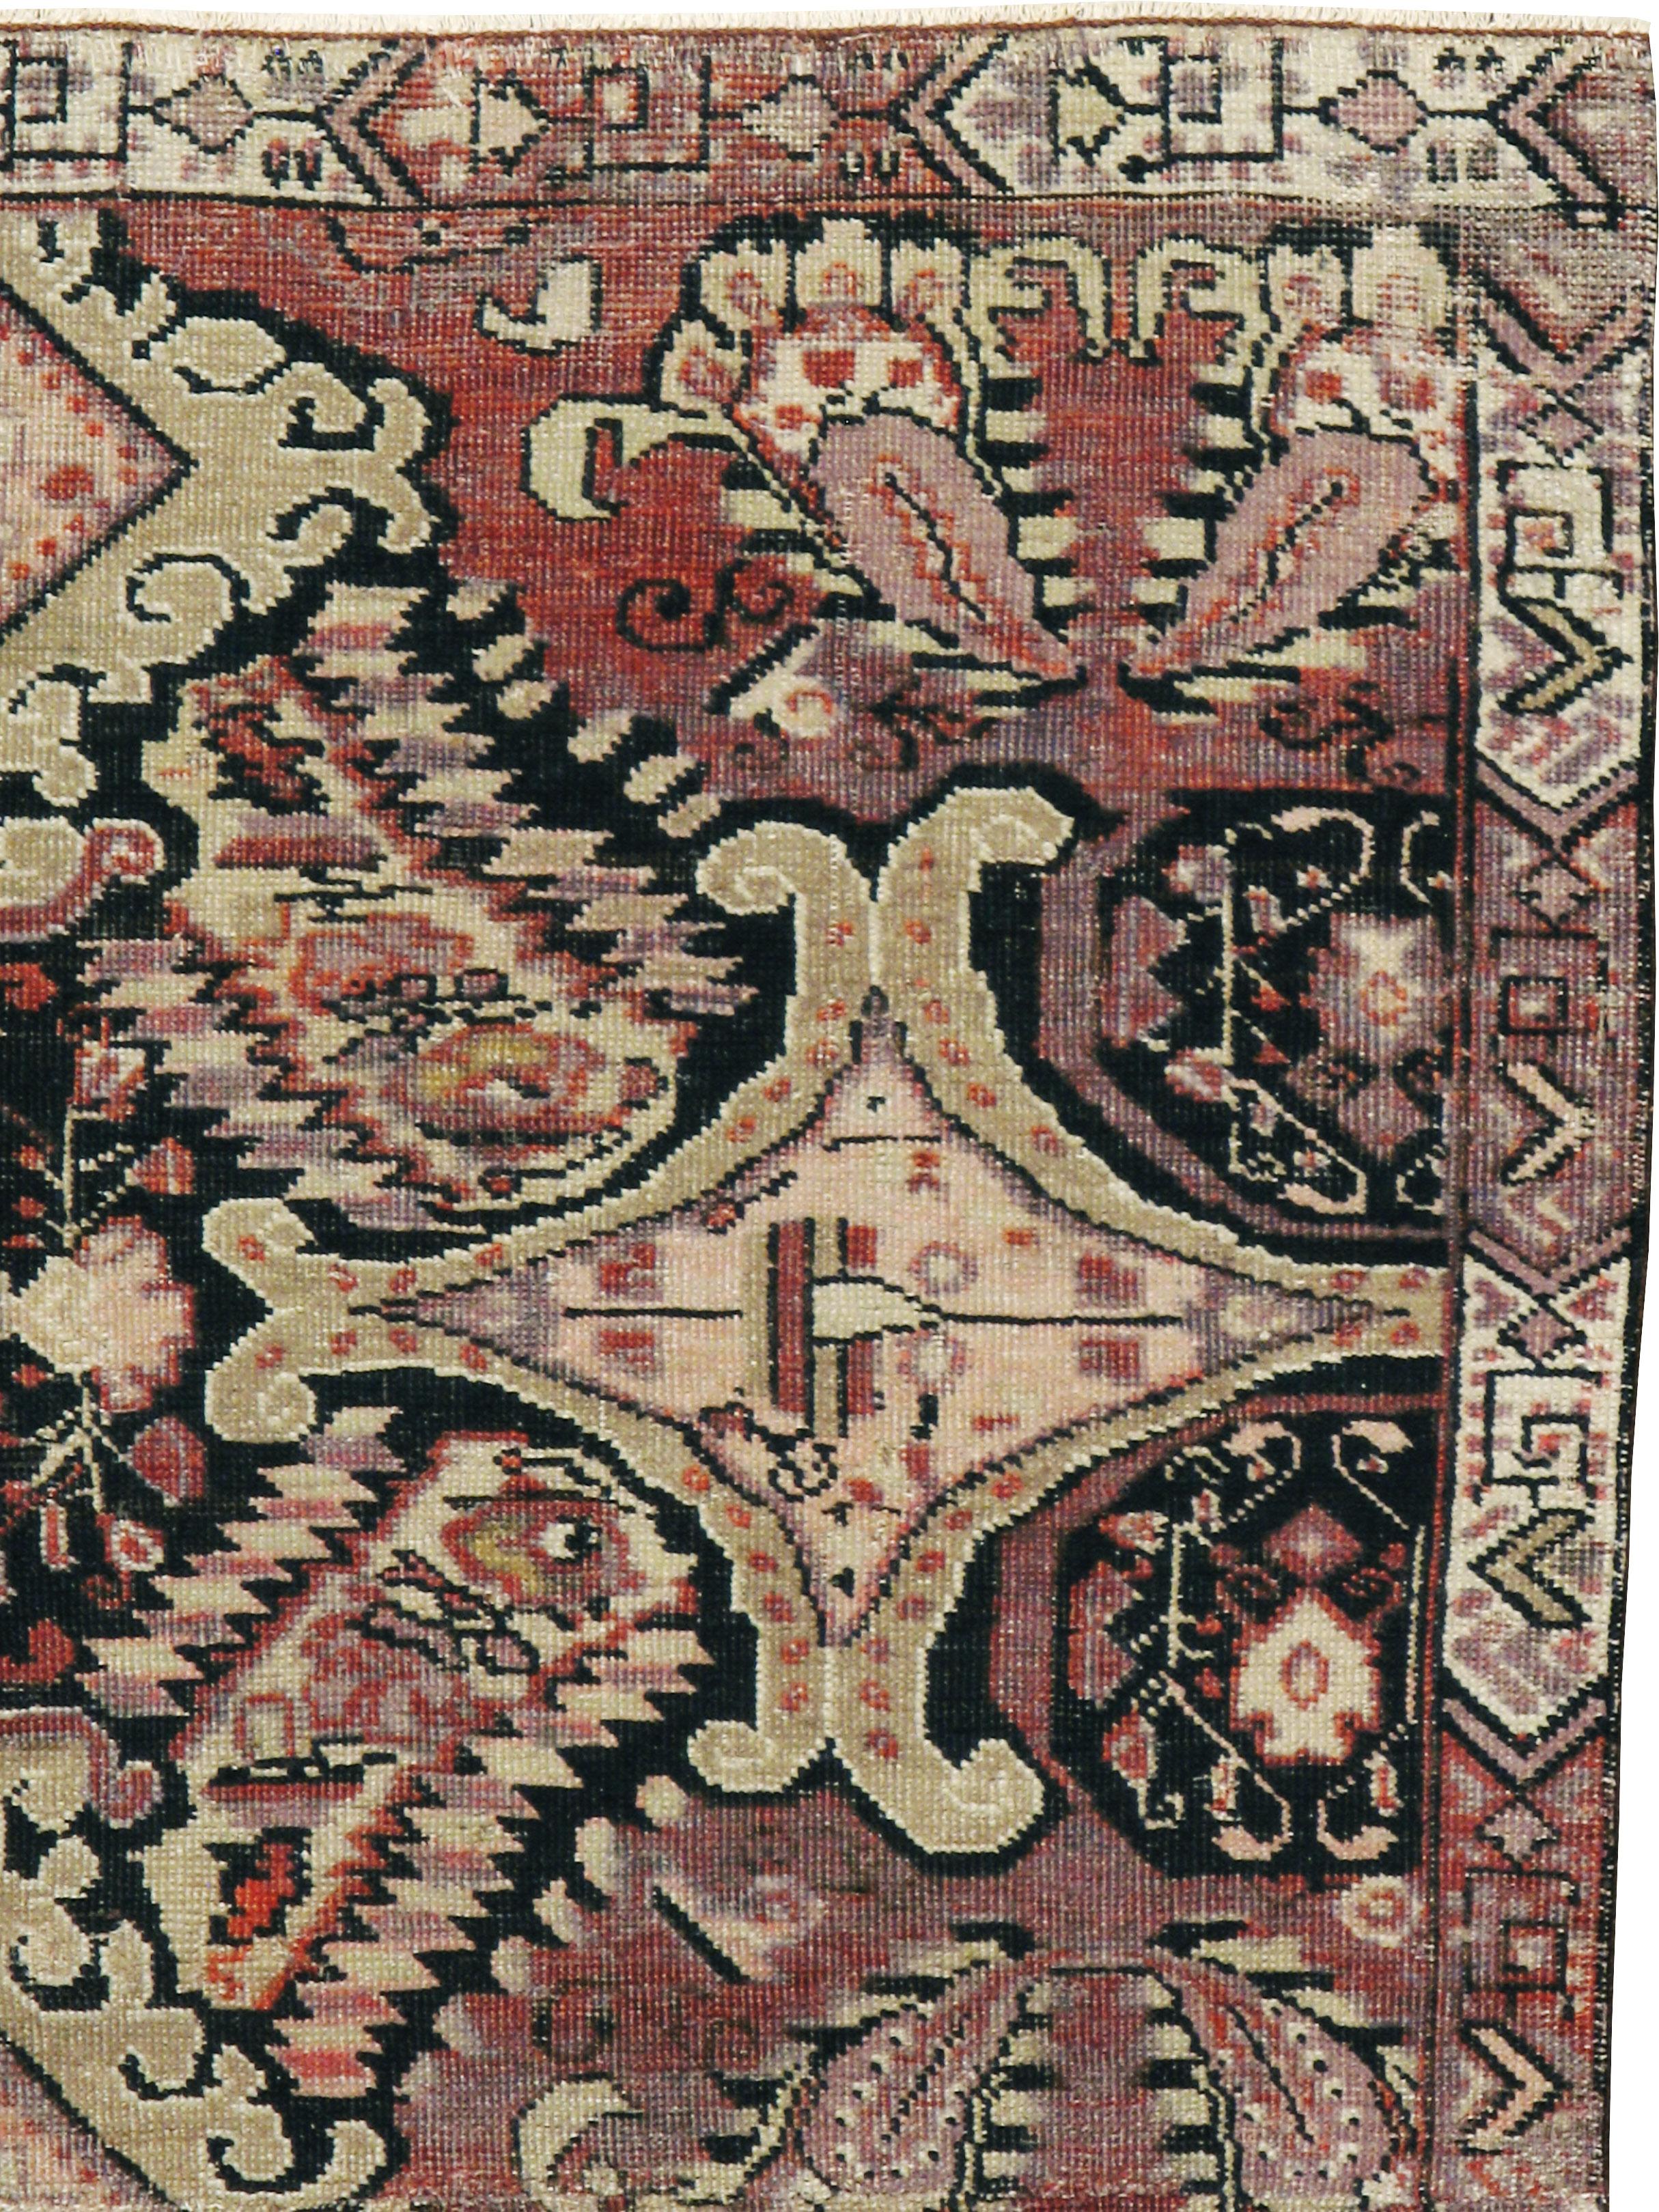 An antique Caucasian Karabagh rug from the early 20th century.
Size: 3'11